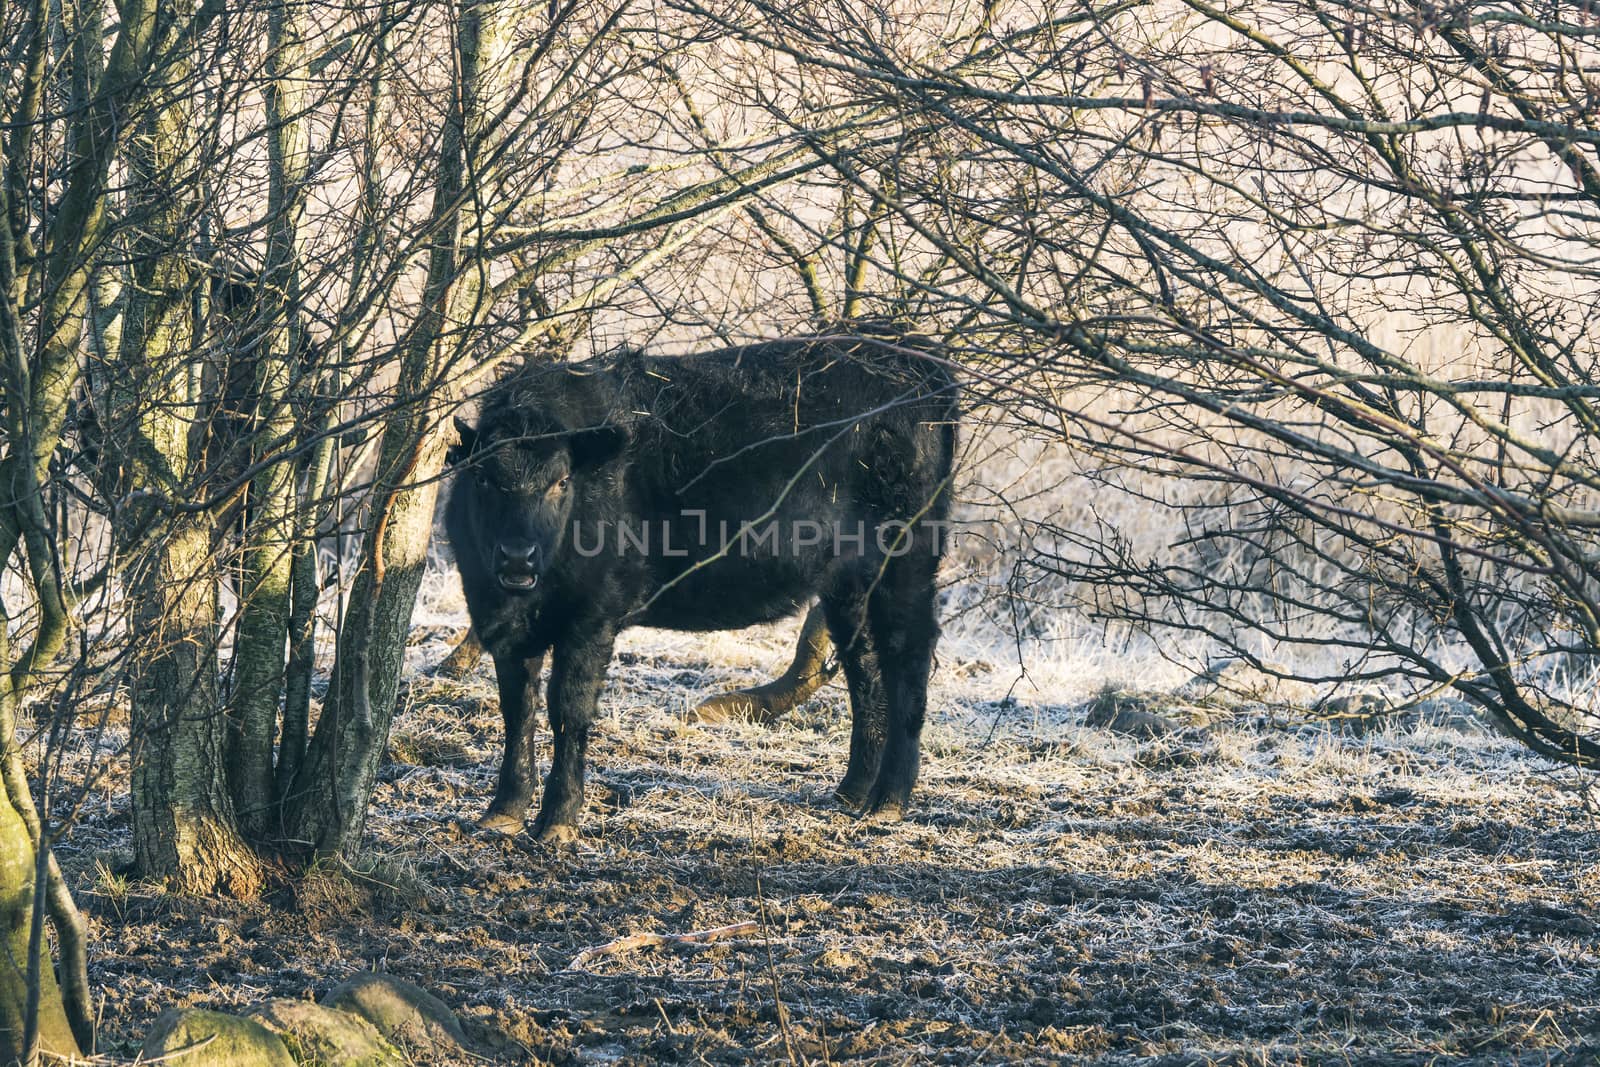 Black cow standing in some trees on a cold frosty wintere day with sunshine